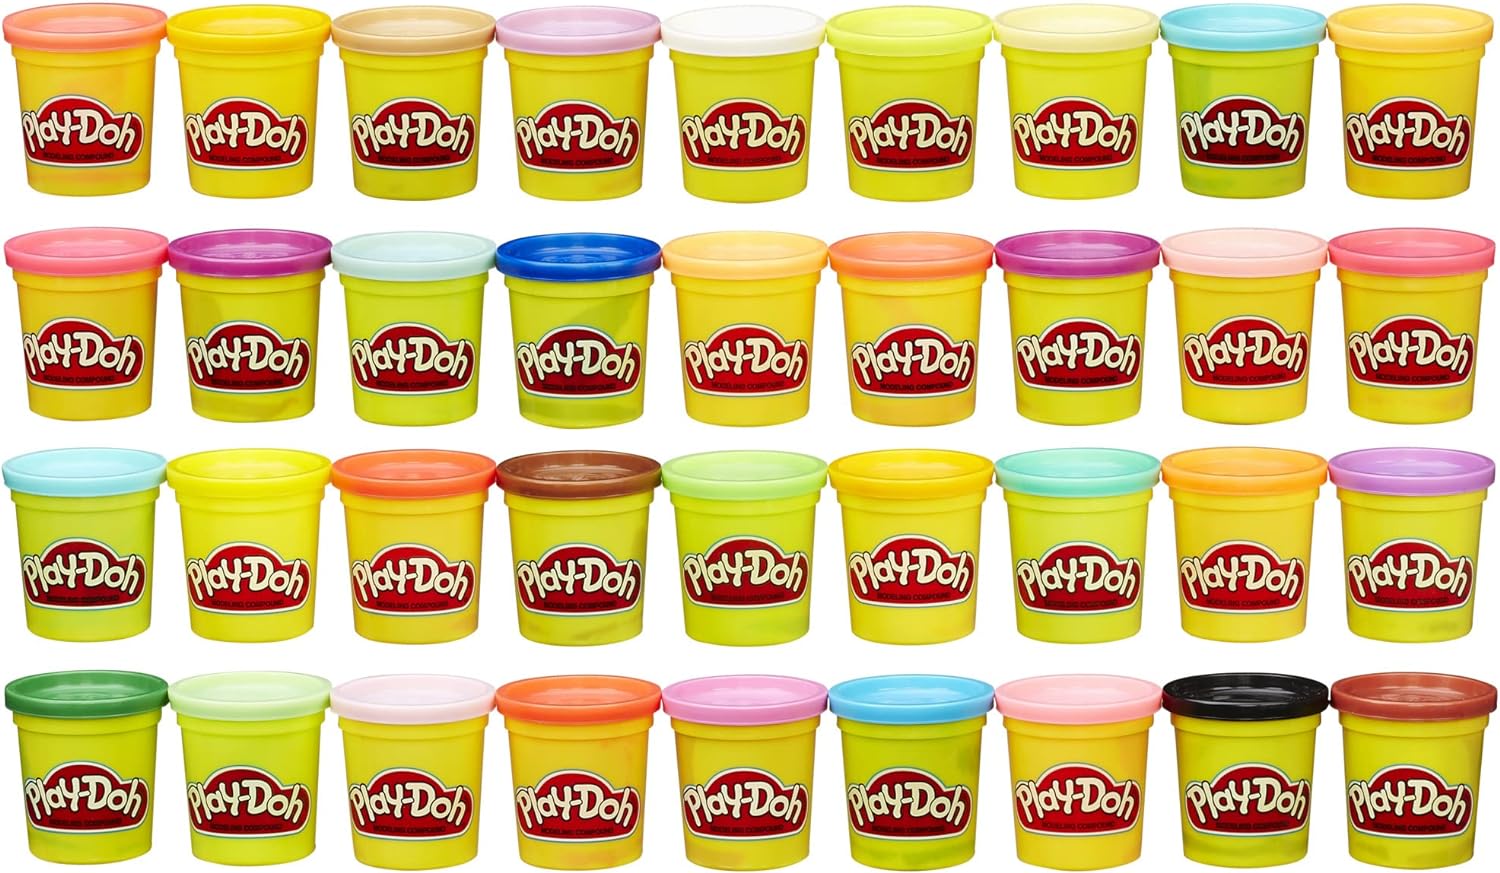 Play-Doh Modeling Compound 36 Pack Case of Colors, Party Favors, Non-Toxic, Assorted Colors, 3 Oz Cans (Amazon Exclusive)